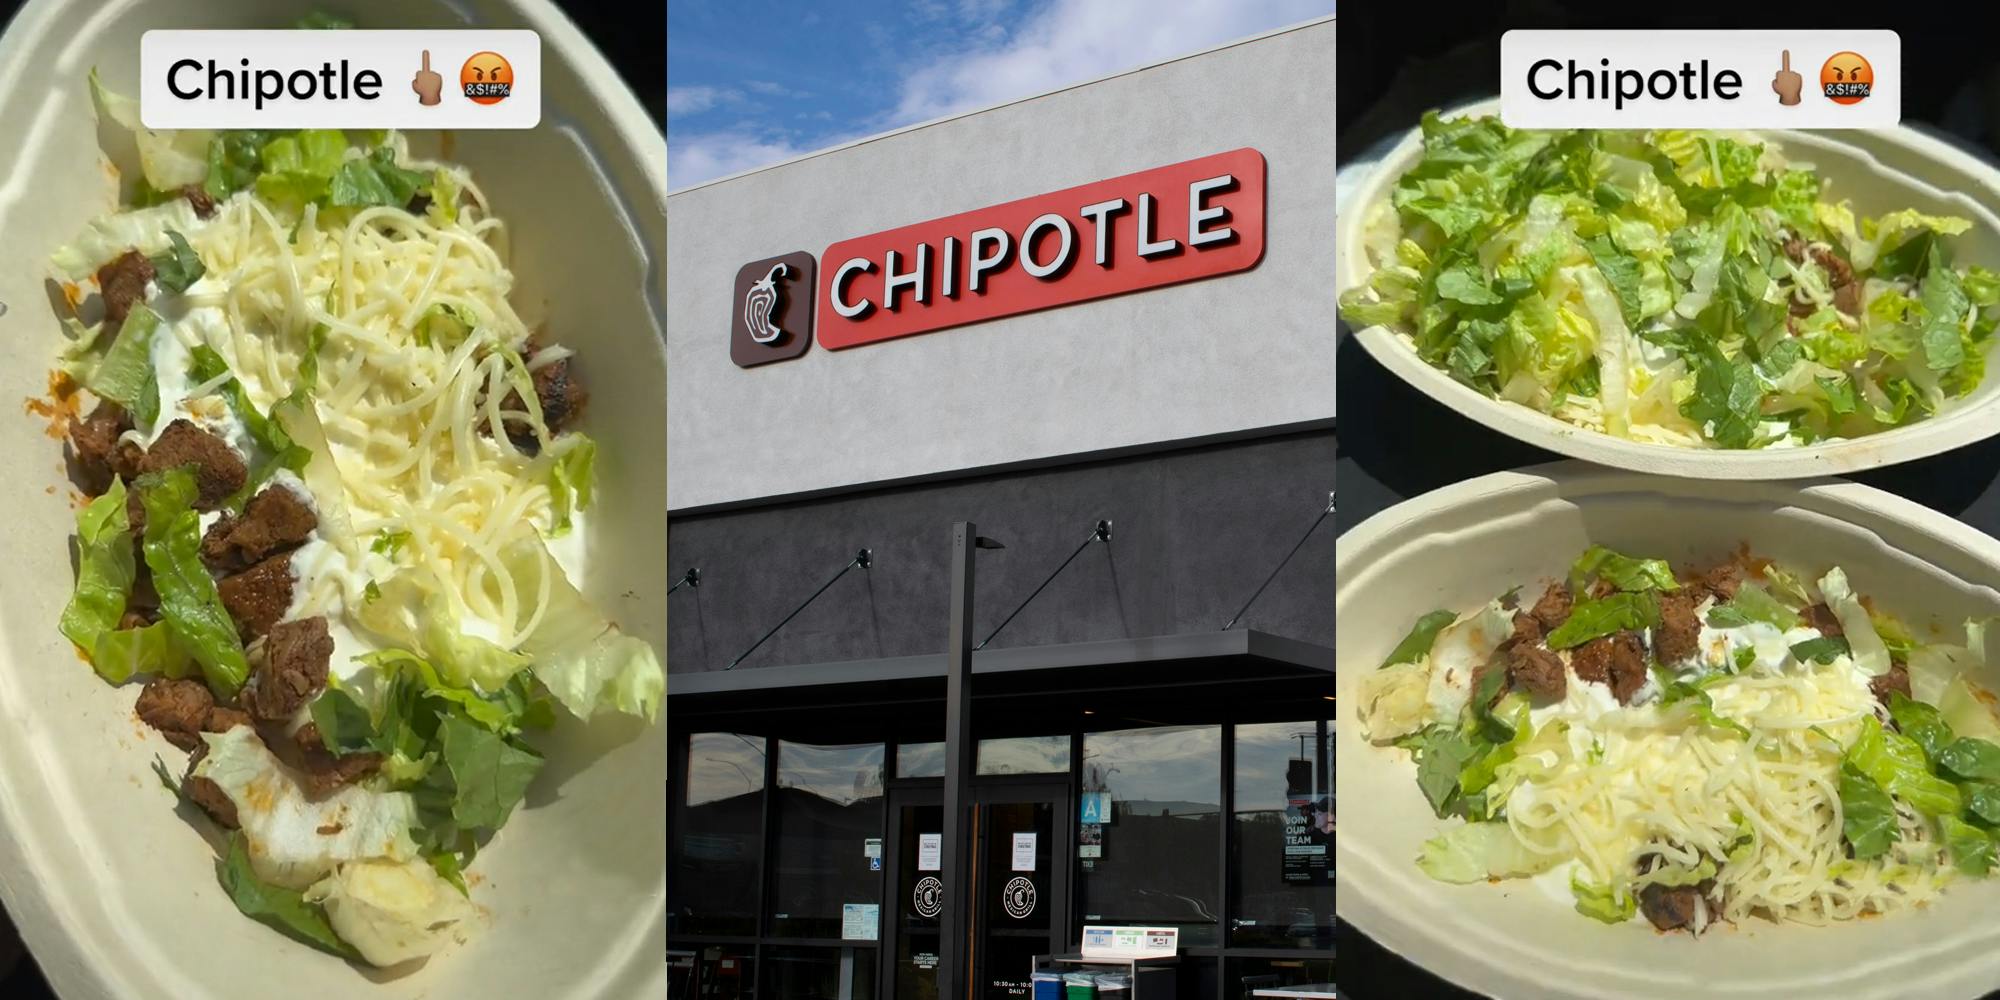 Chipotle food in bowl with caption "Chipotle" (l) Chipotle sign on building (c) Chipotle food in bowls with caption "Chipotle" (r)